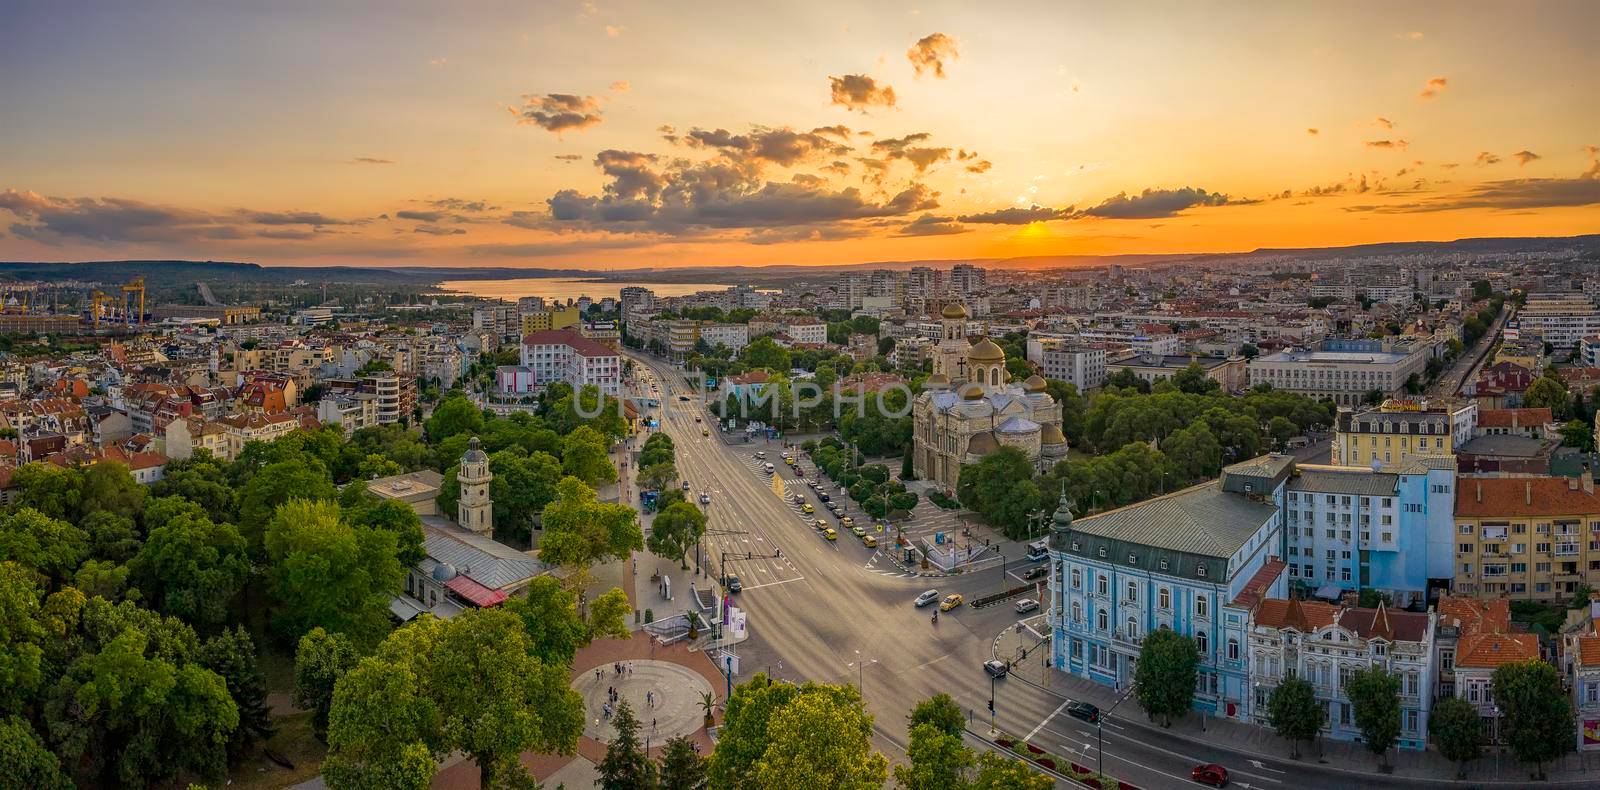 Varna, Bulgaria - July 12, 2019; Aerial view from the drone of the magnificent sunset over centrum of Varna city, Bulgaria by EdVal